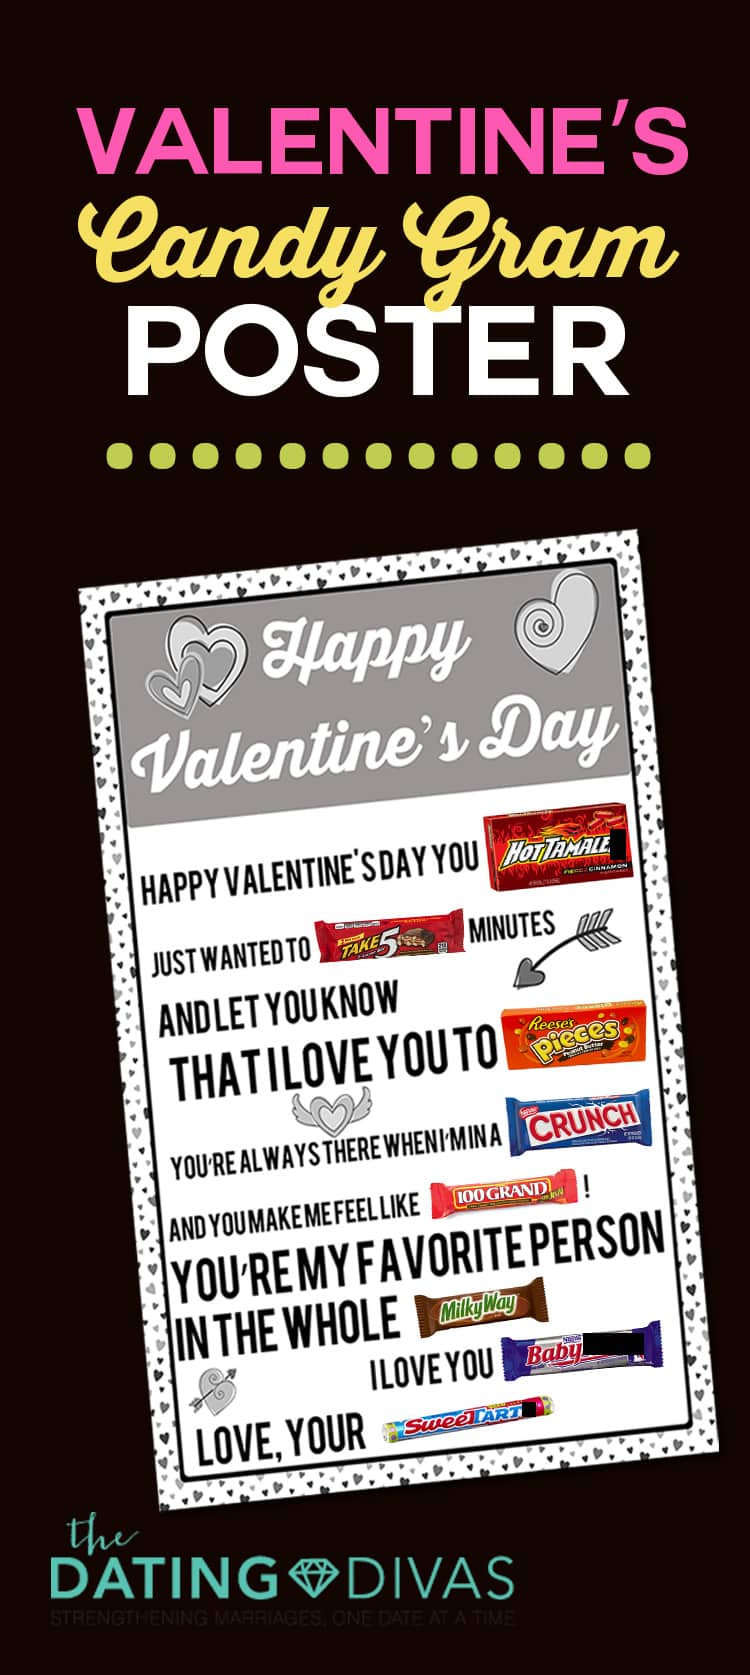 Valentines Day Candy Grams
 Printable Candy Gram Posters The Dating Divas